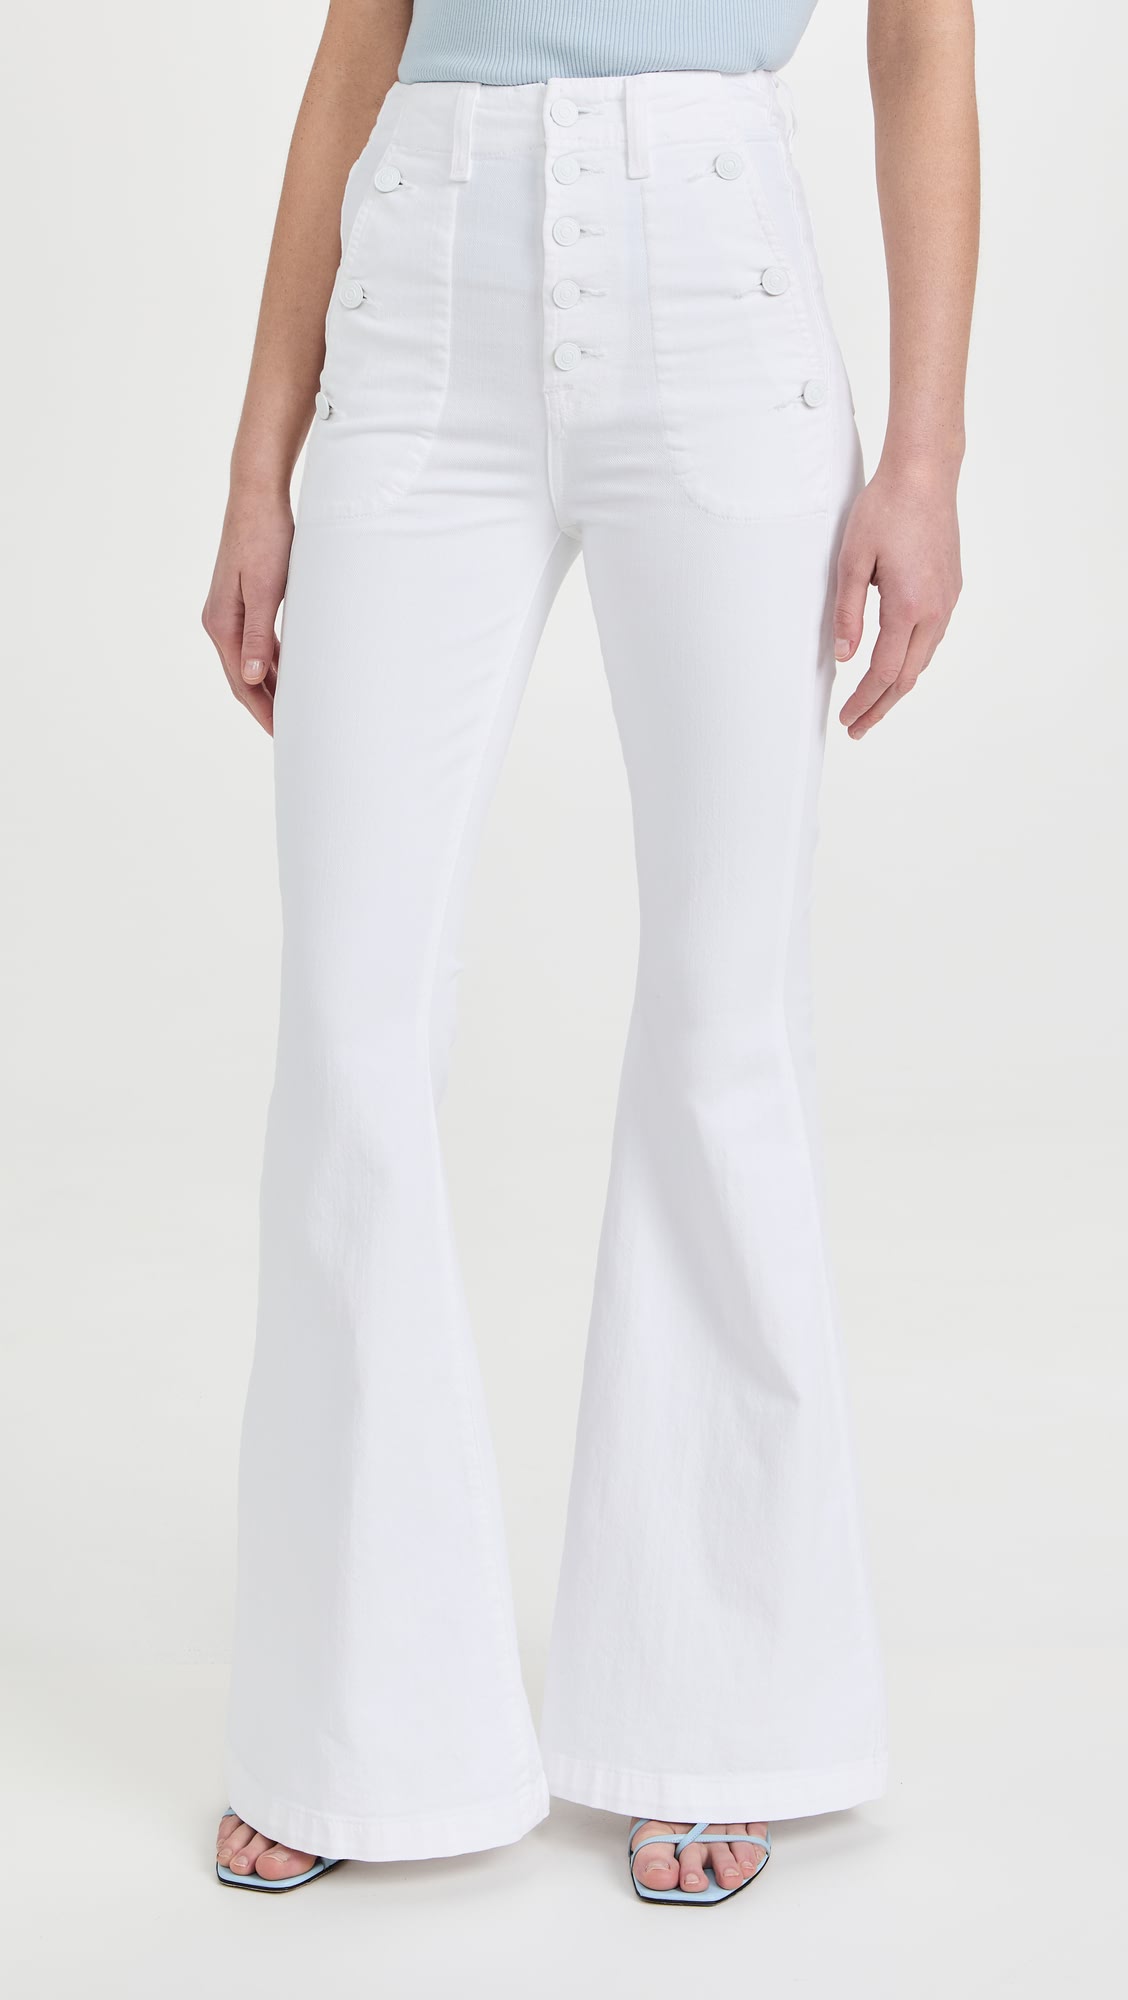 Best White Flare Pants 7 For All Mankind